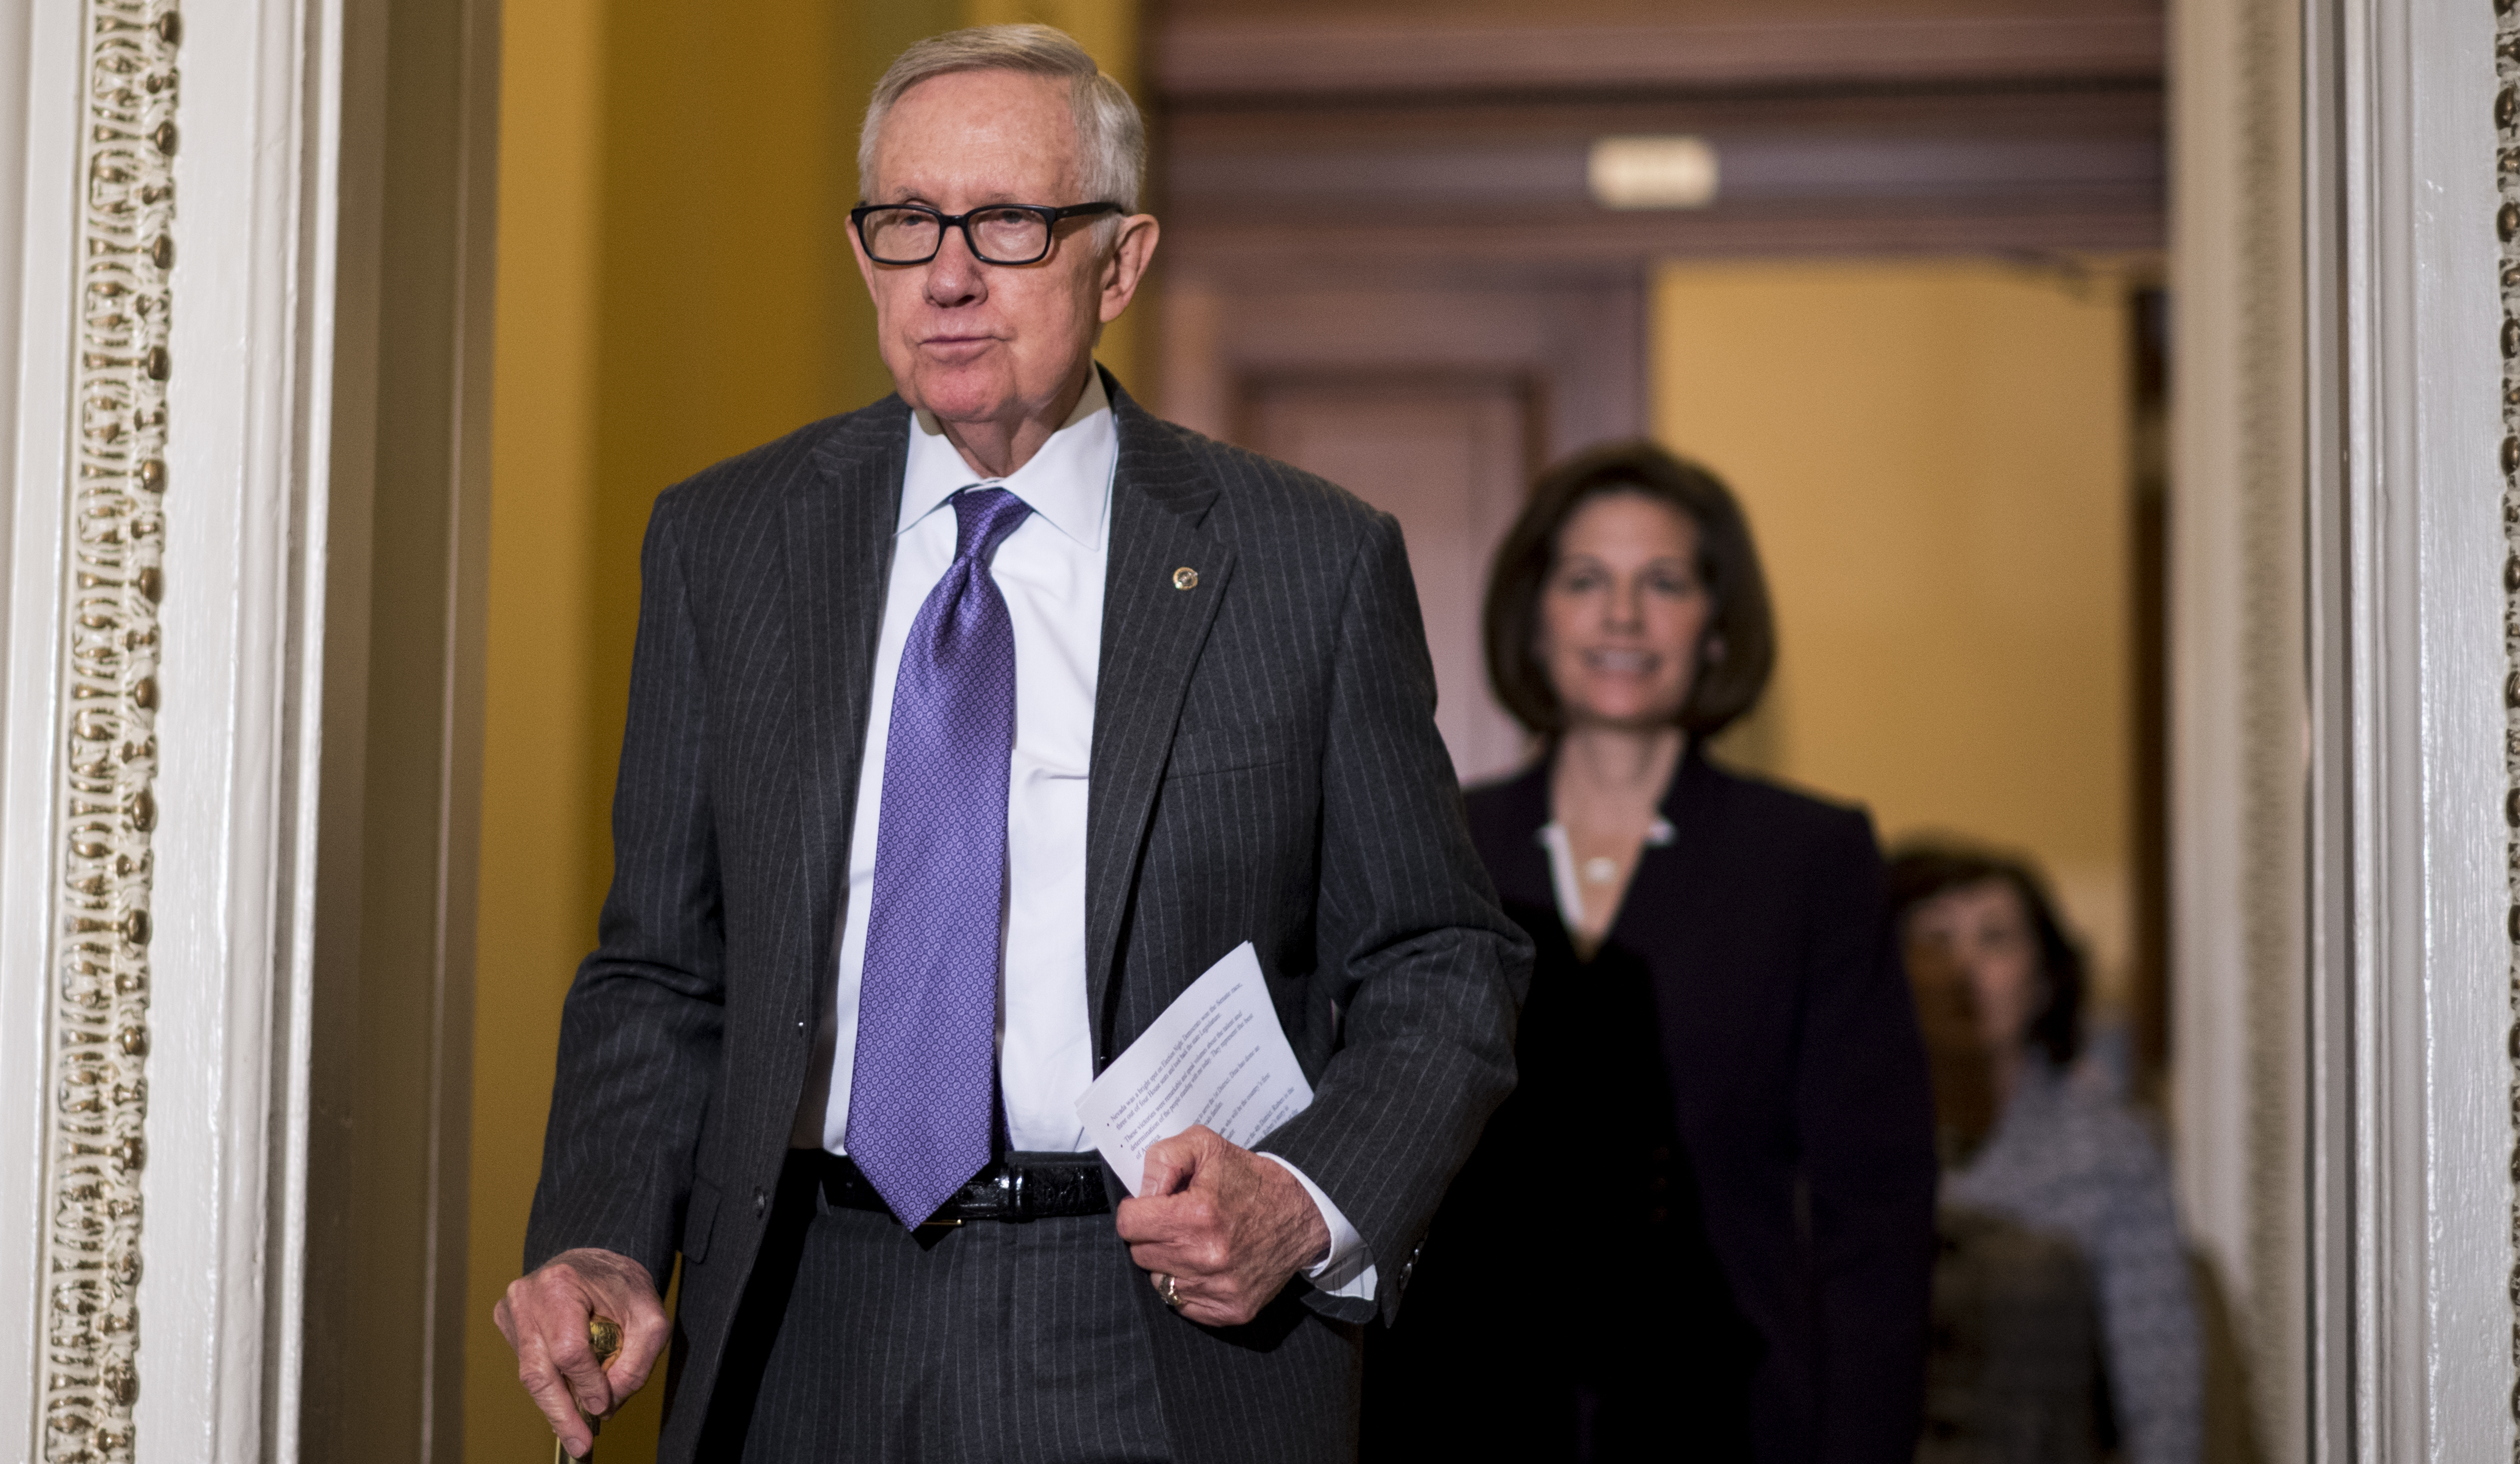 Senate Minority Leader Harry Reid, D-Nev., leads the Democrats of the Nevada delegation to the podium for a media availability in the U.S. Capitol on Monday, Nov. 14, 2016. (Bill Clark—CQ-Roll Call,Inc.)